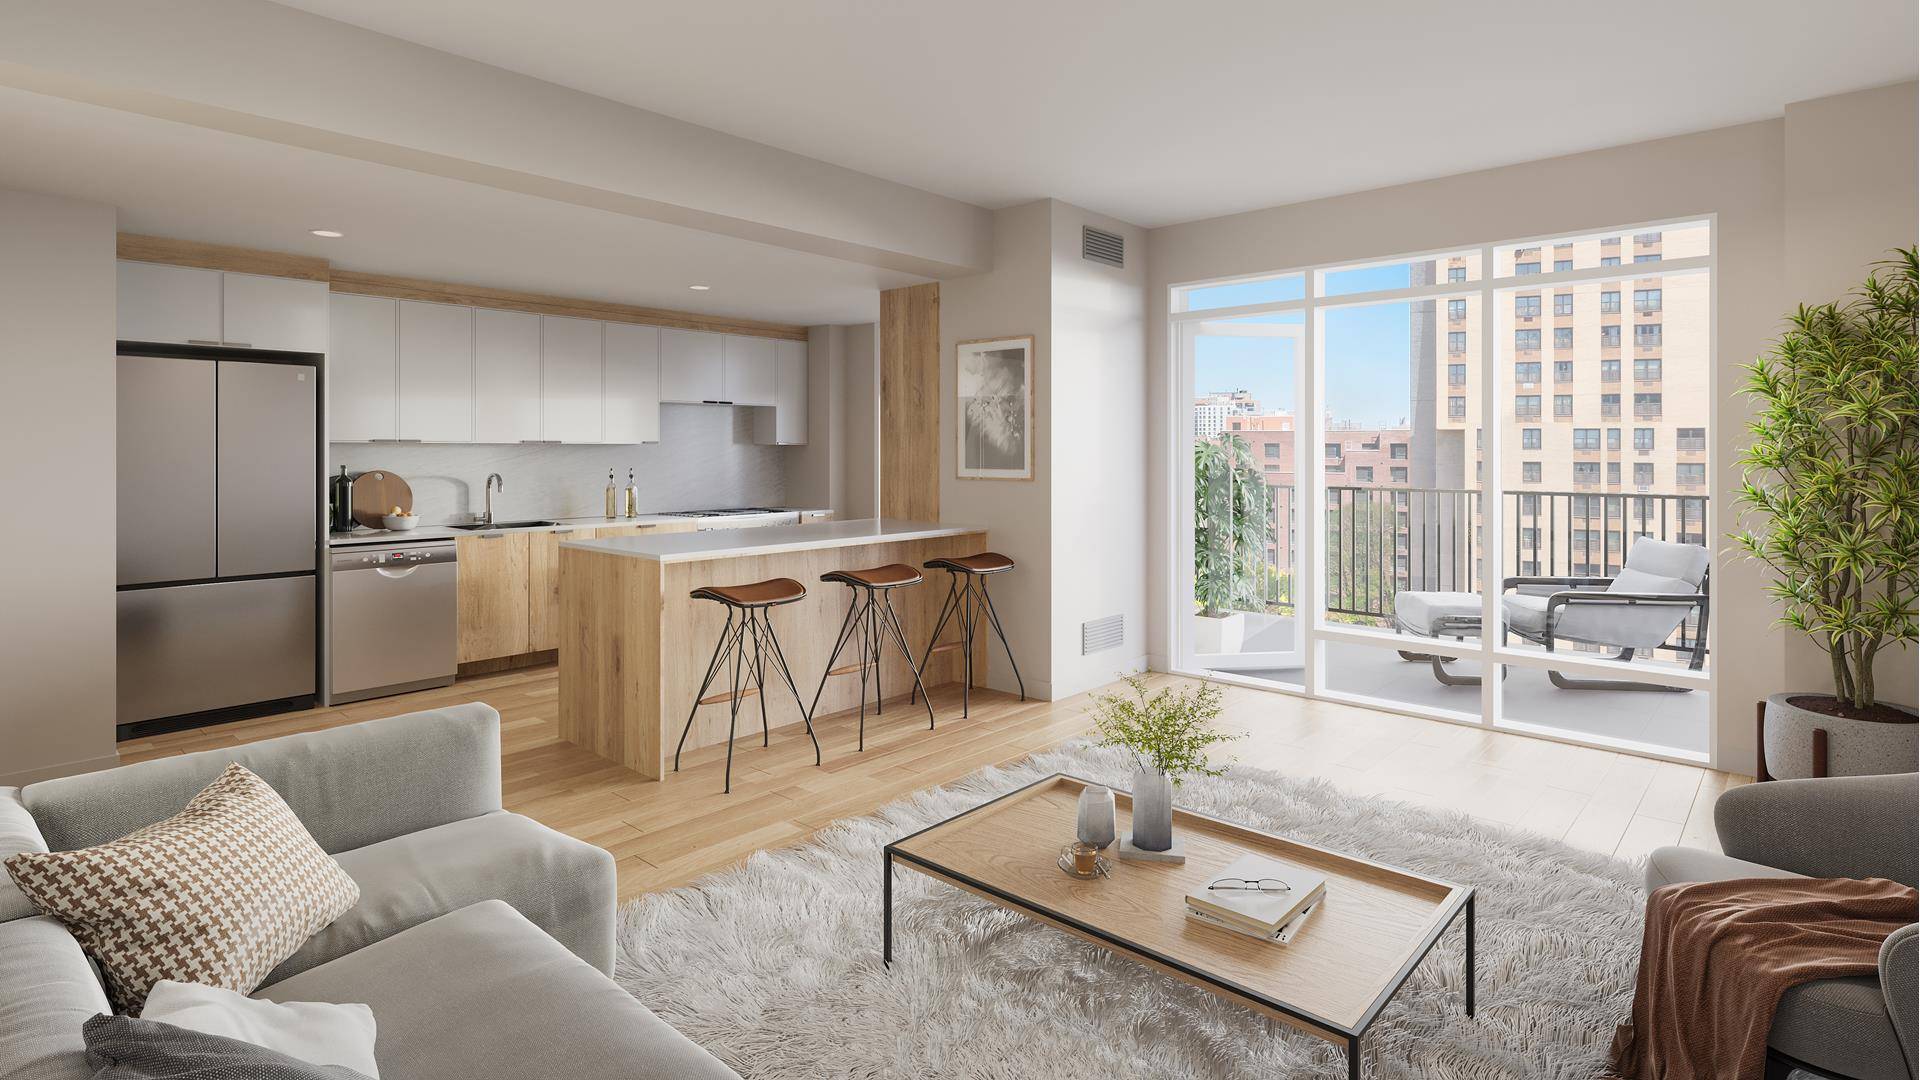 Brand new north east facing 2 BdRm 2 bath condominium residence with large balcony at the PATAGONIA, a ground up 12 story development just now completed in South Harlem !